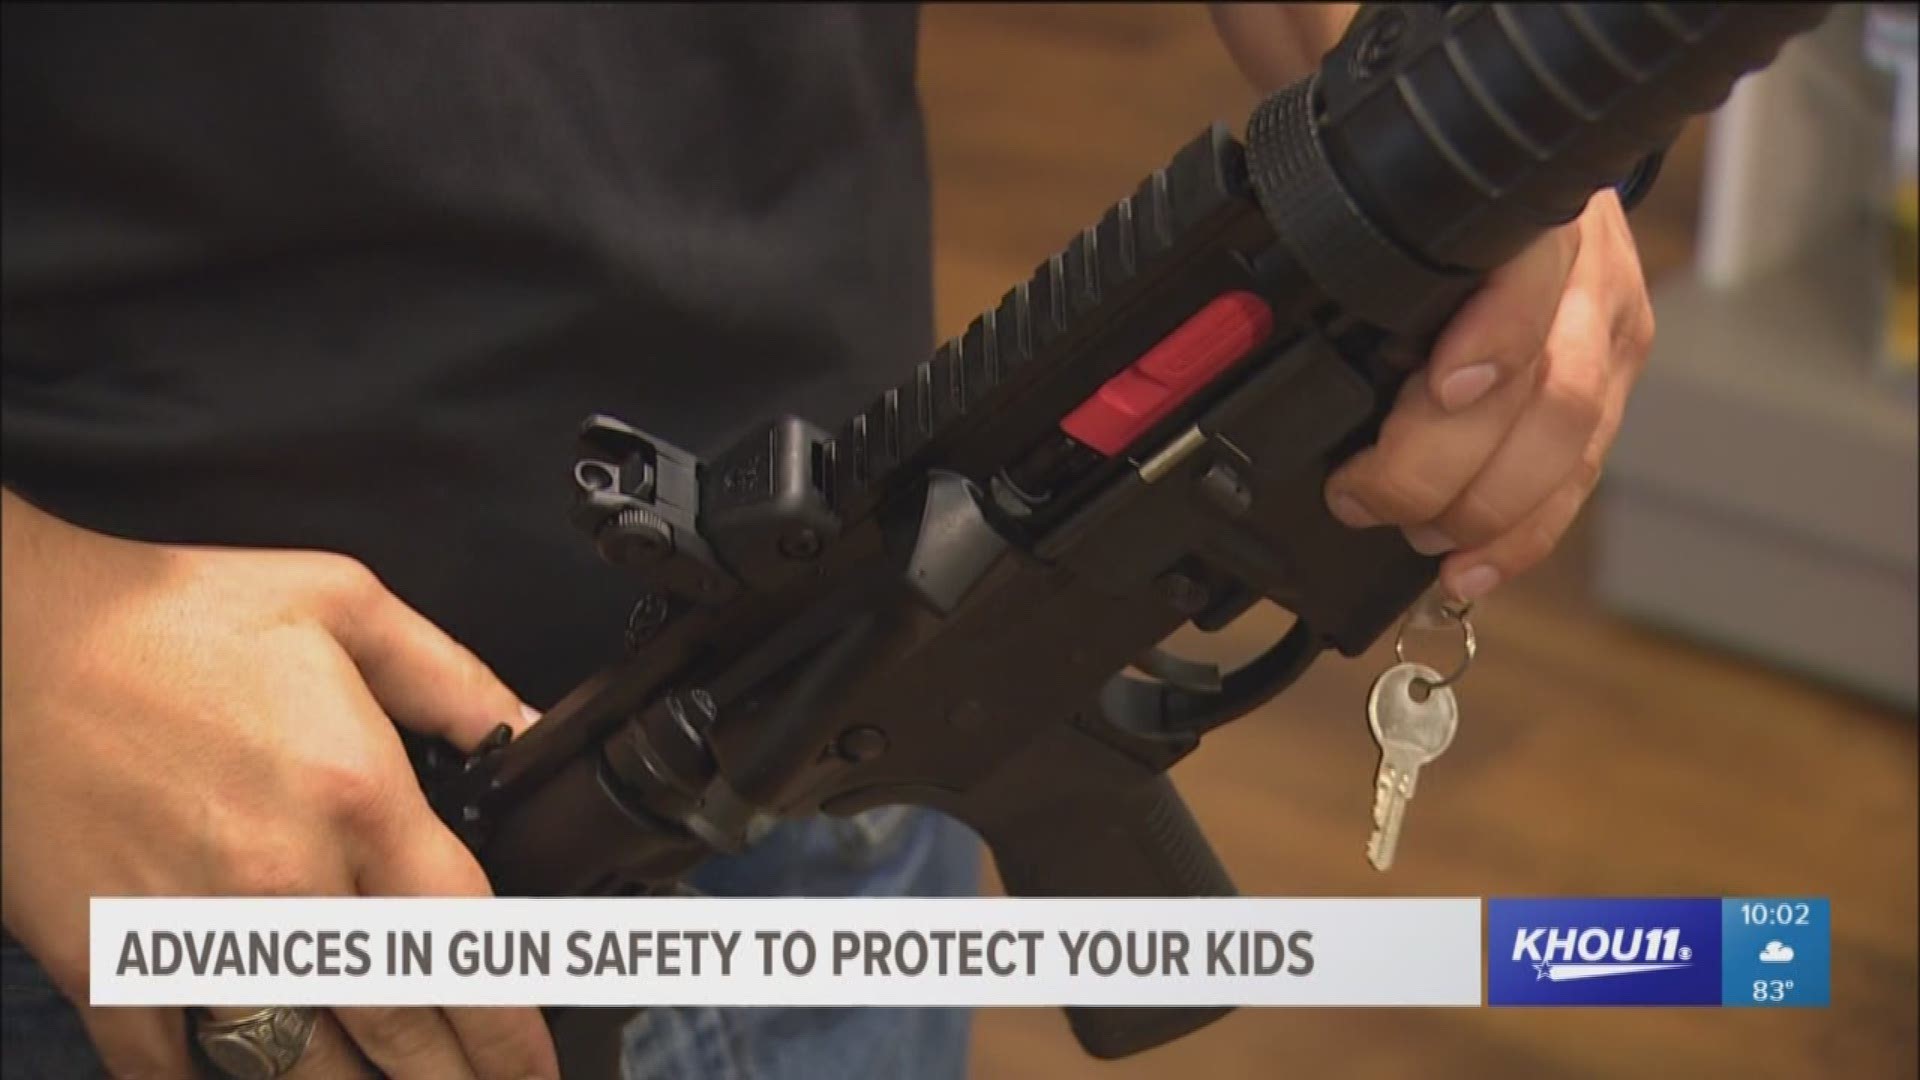 How do we stop accidental shootings, especially ones with children involved?